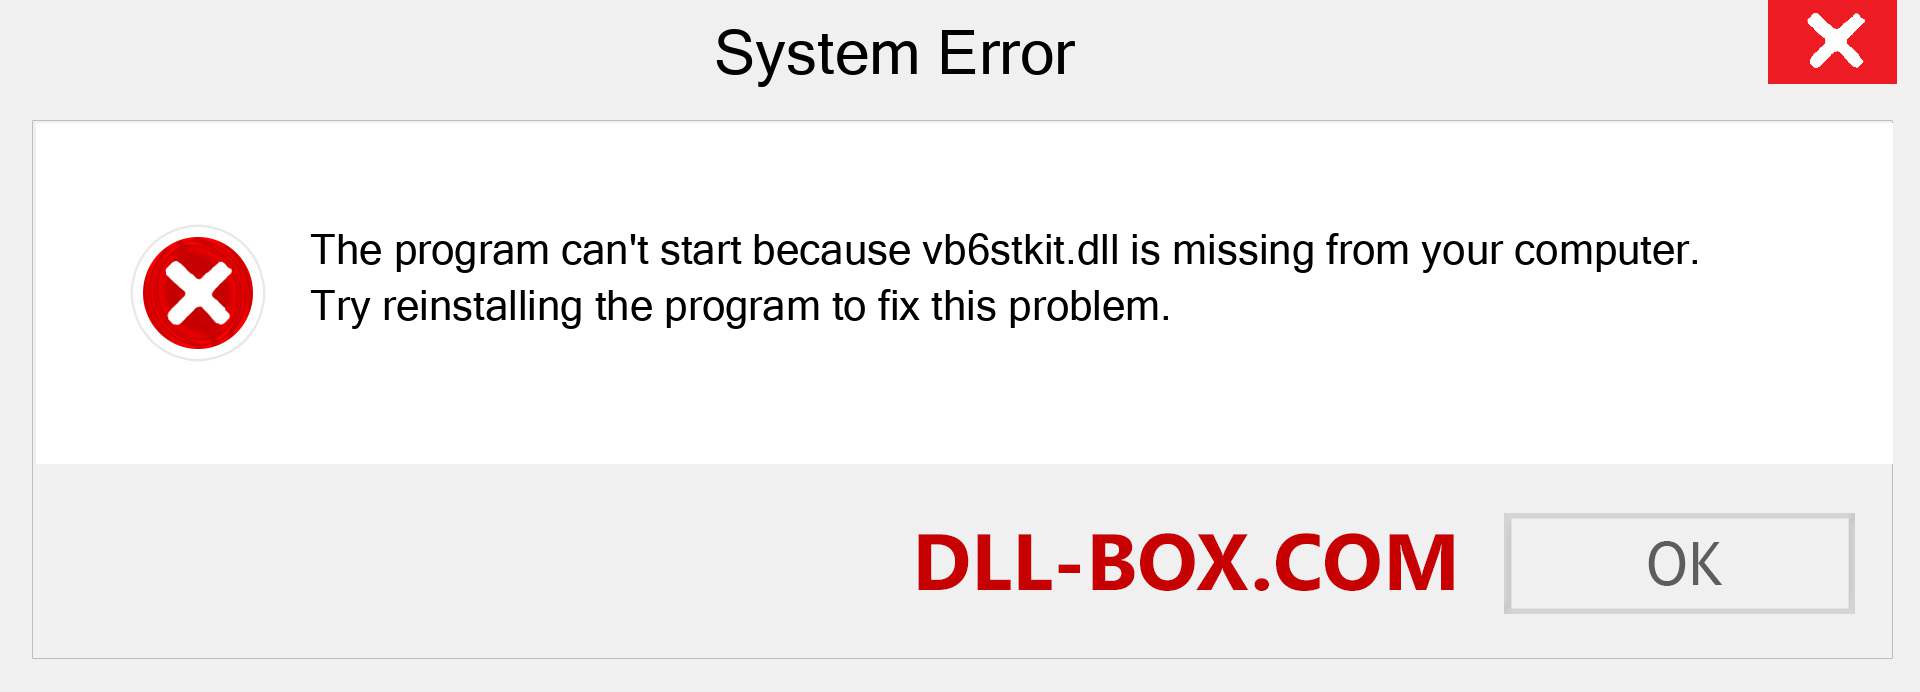  vb6stkit.dll file is missing?. Download for Windows 7, 8, 10 - Fix  vb6stkit dll Missing Error on Windows, photos, images